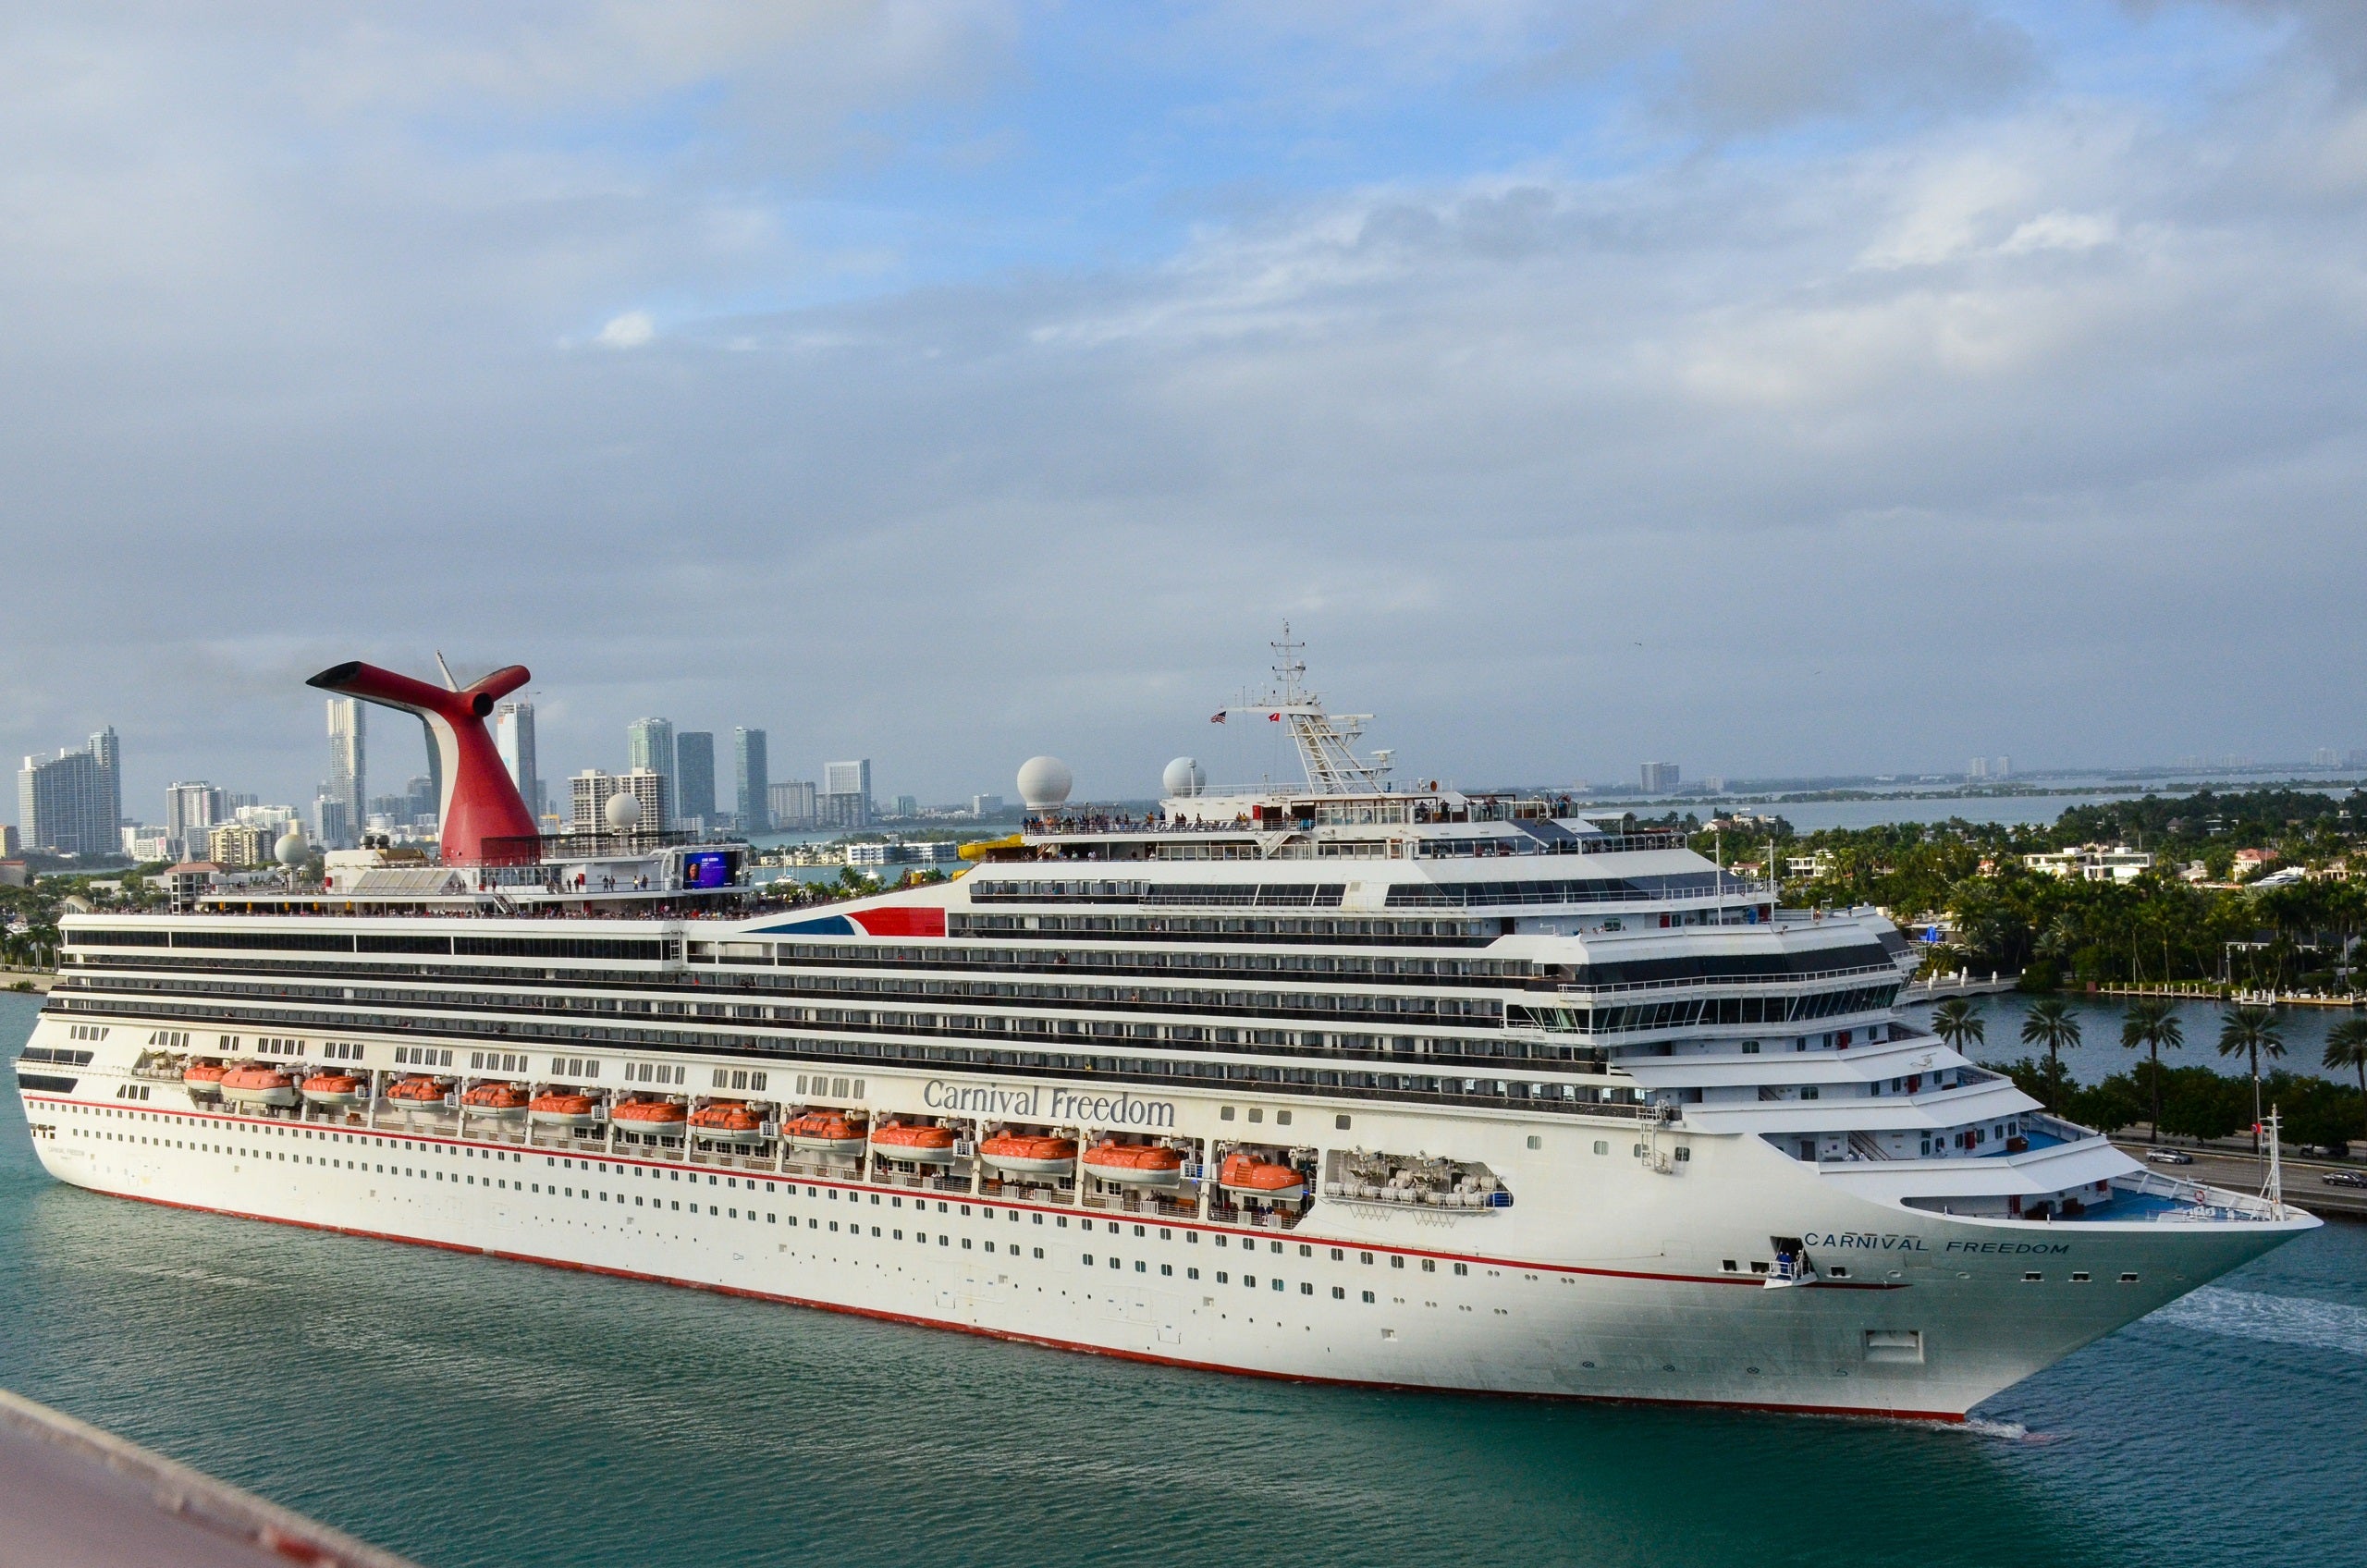 Act fast: Carnival’s 3-day flash sale has cruises starting at $109 per person